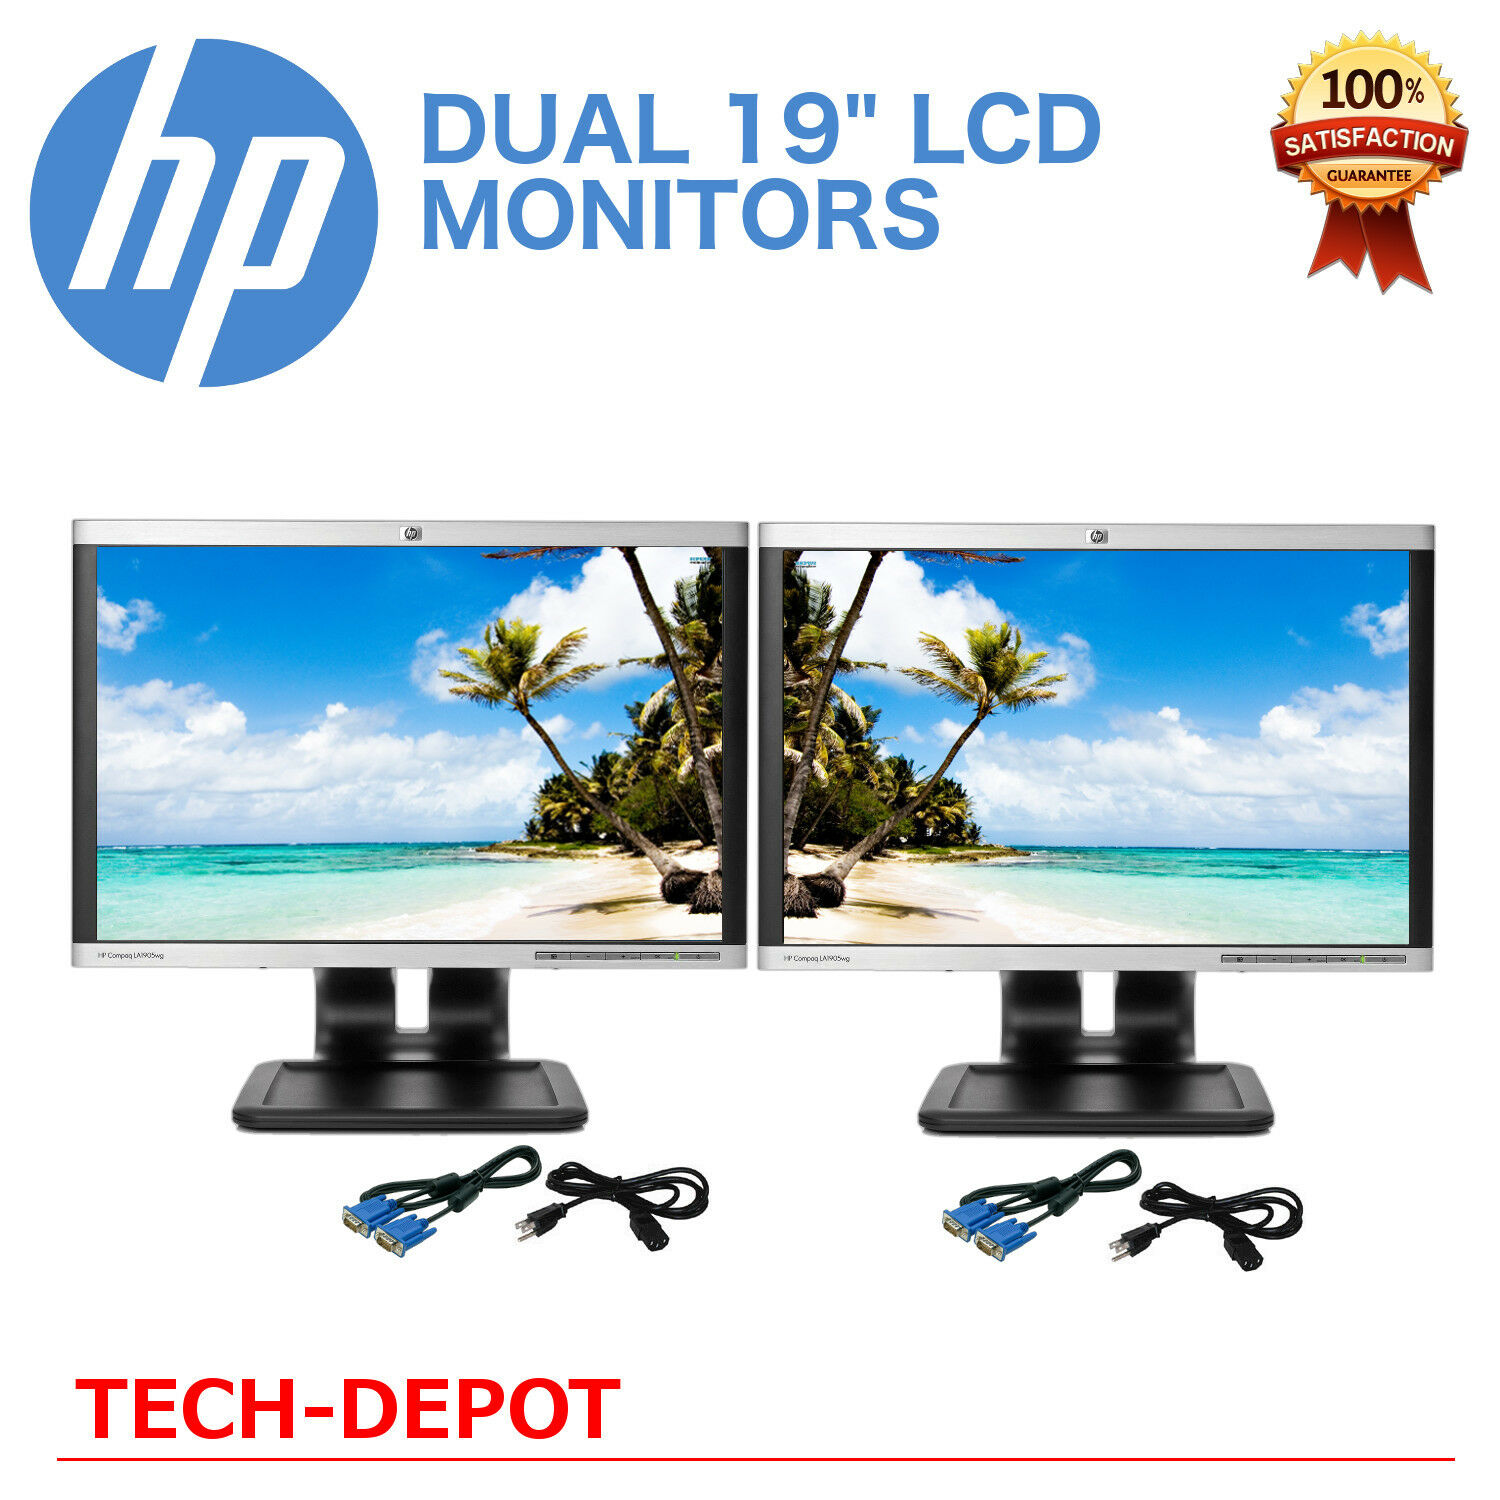 Dual Hp 19" Lcd Monitors Matching Model Pair With Cables - Bright And Sharp